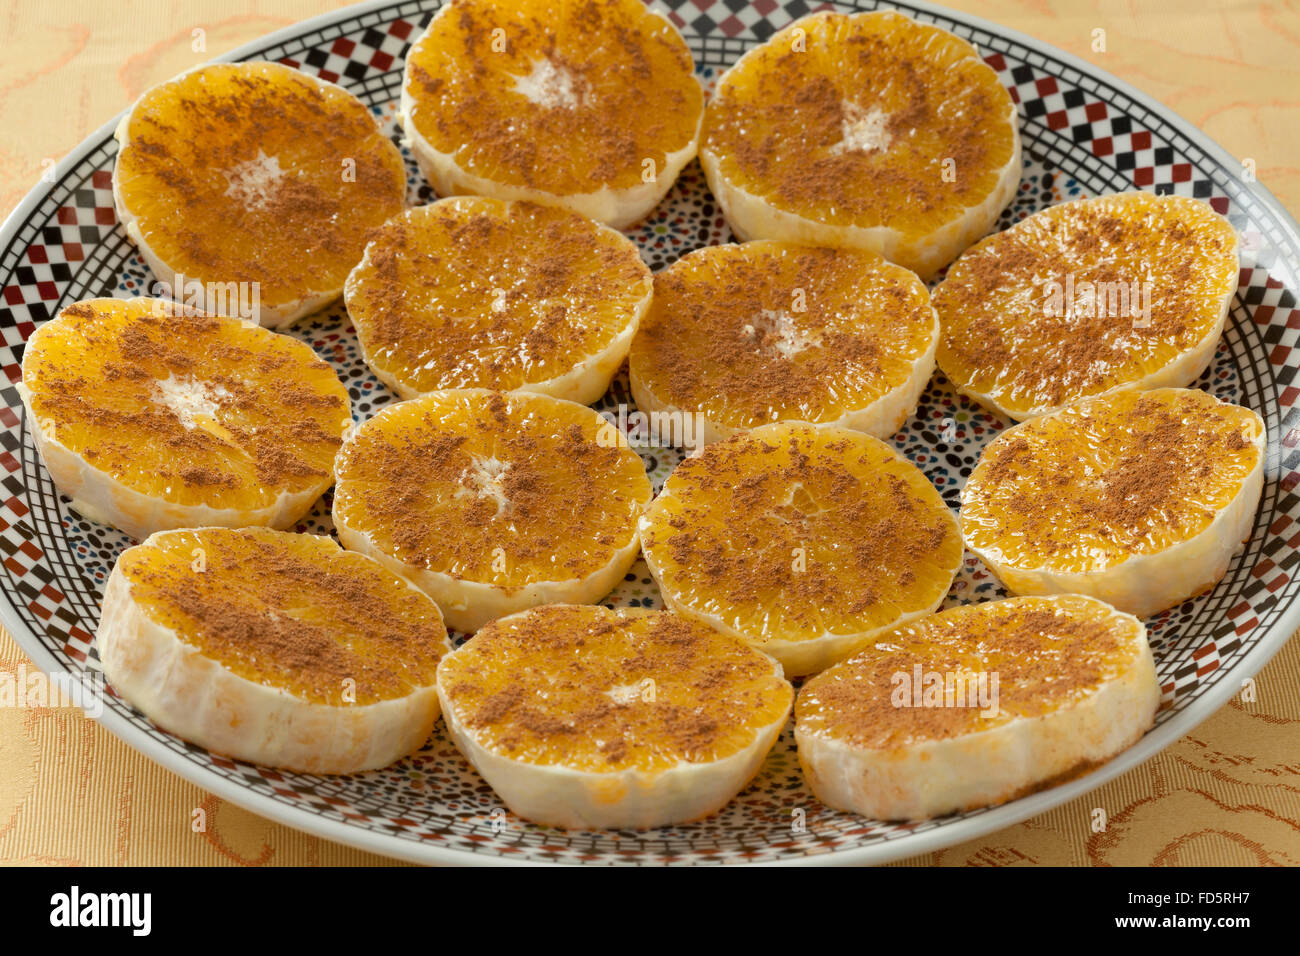 Traditional Moroccan orange slices with sugar and cinnamon as dessert Stock Photo